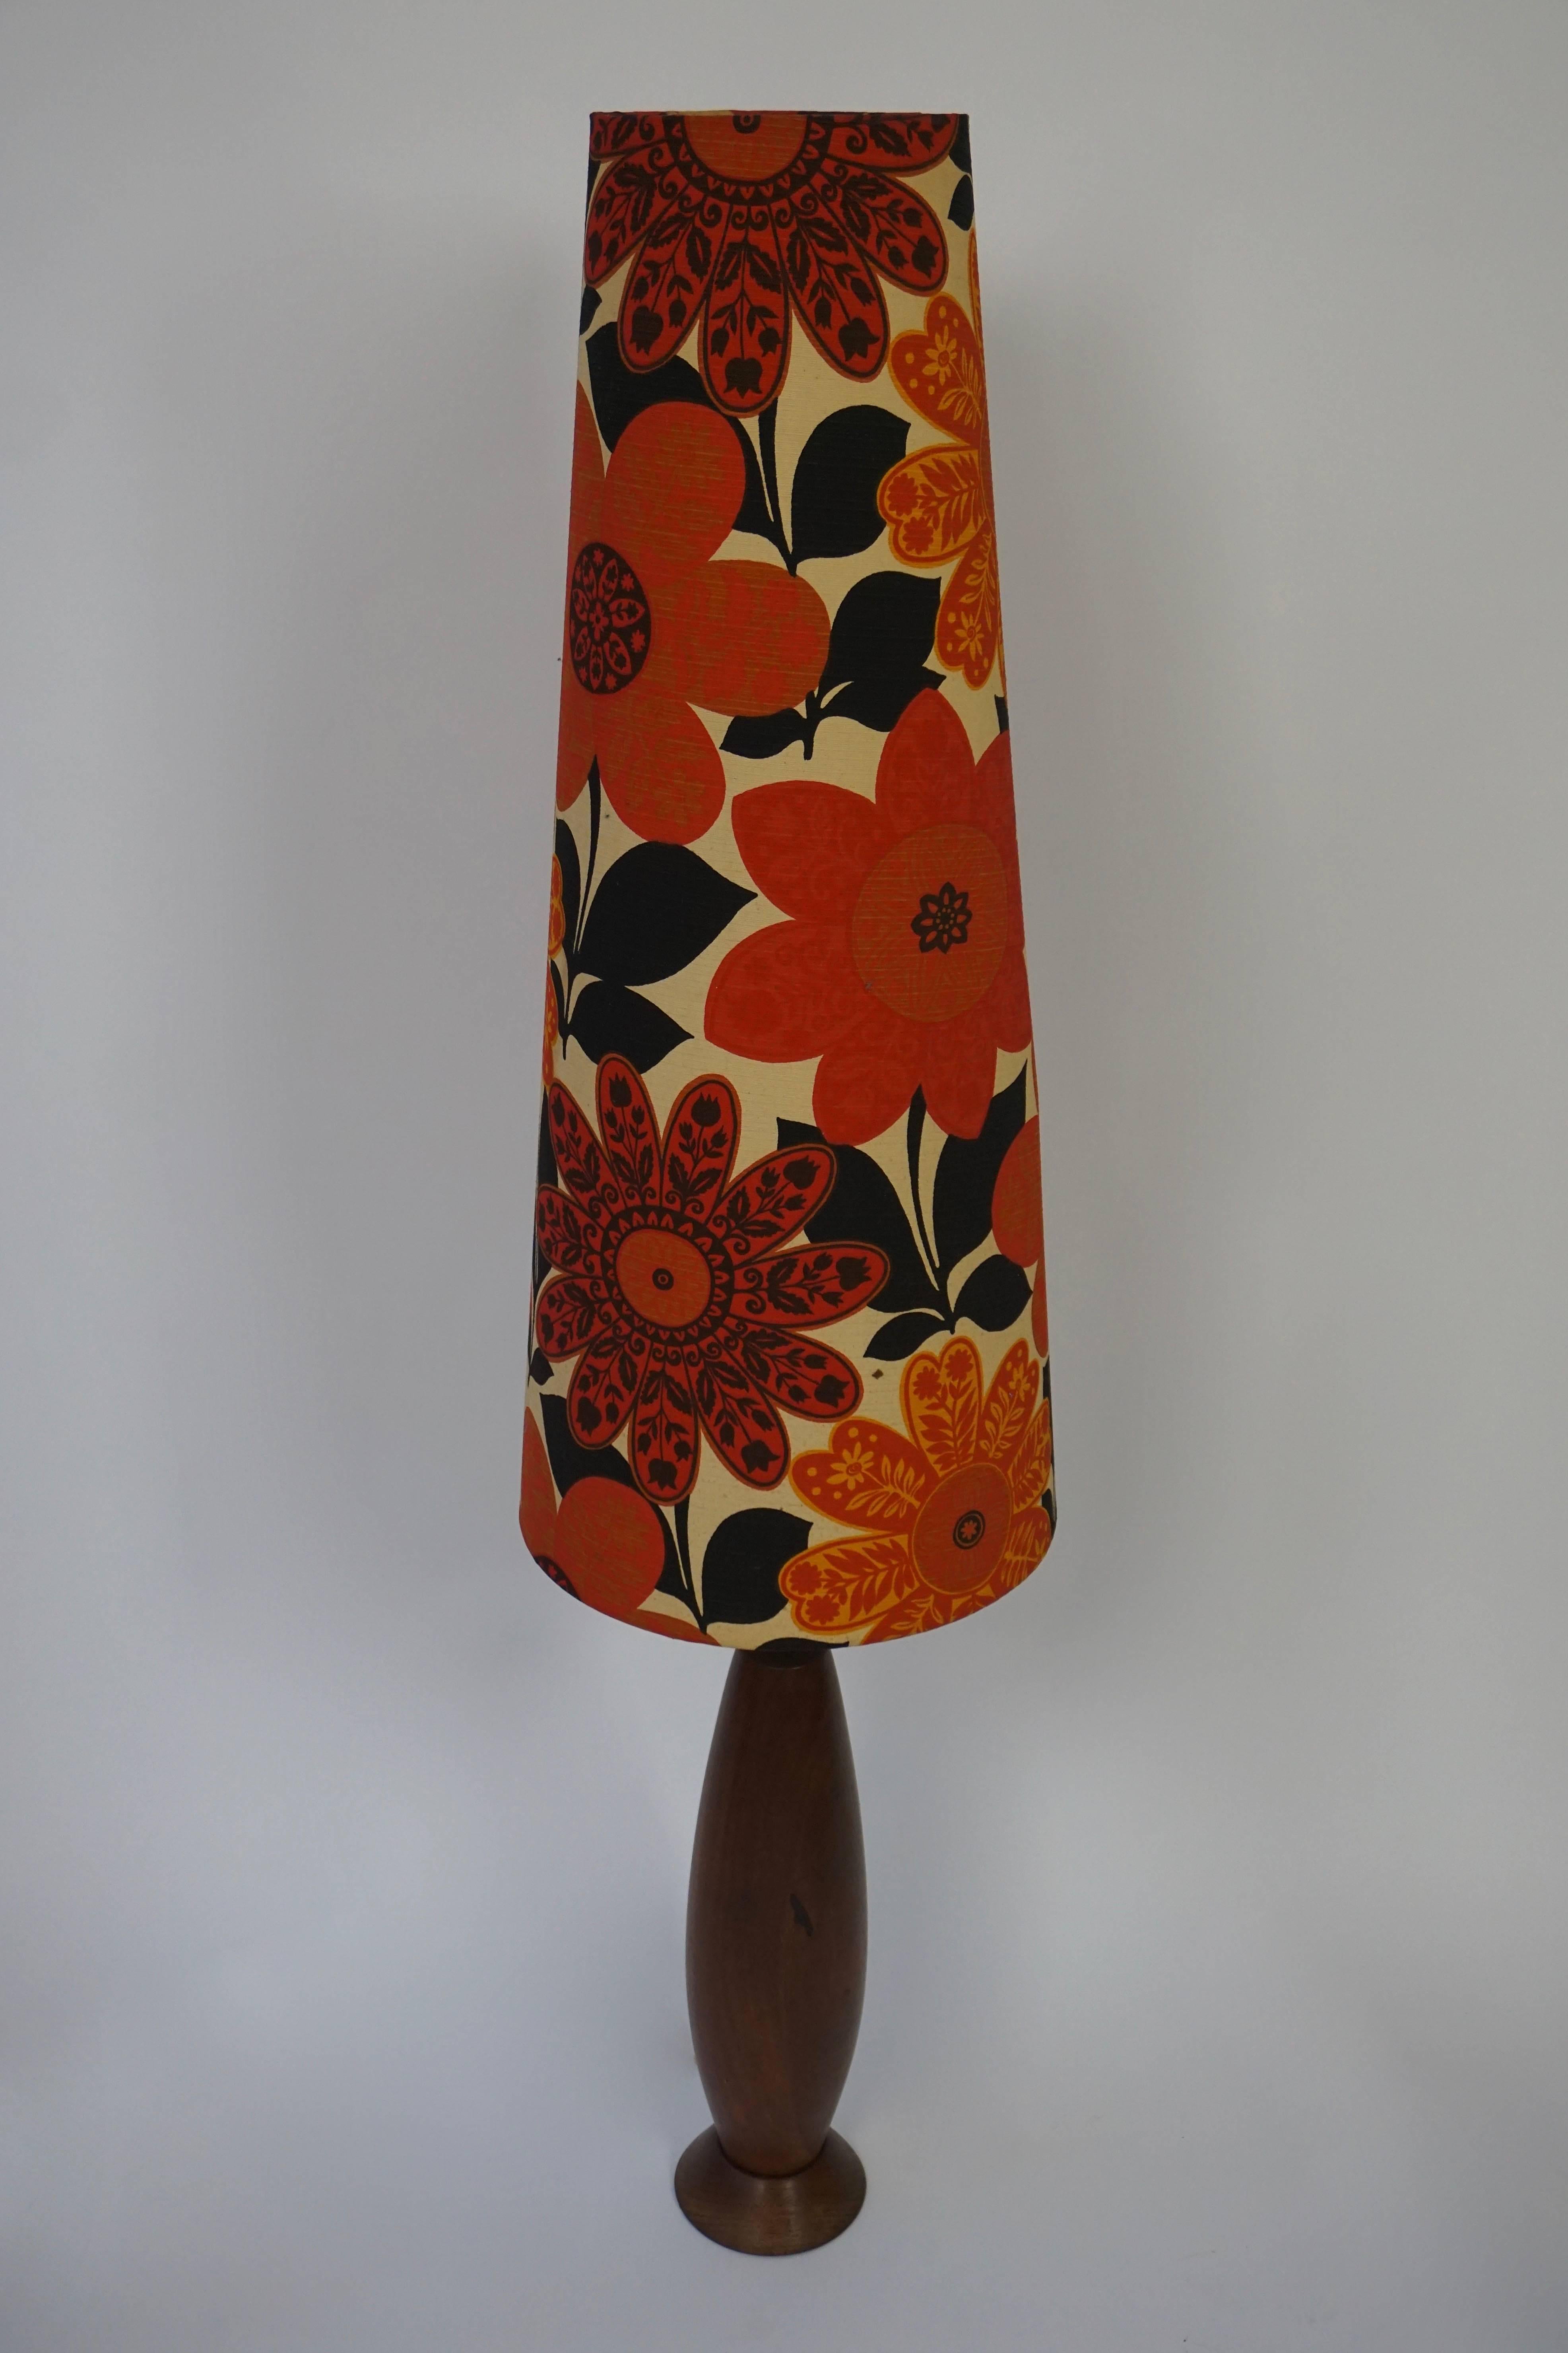 Belgium floor lamp with wooden base and flower shade.
Height 144 cm.
Diameter shade 35 cm.
Diameter base 15 cm.